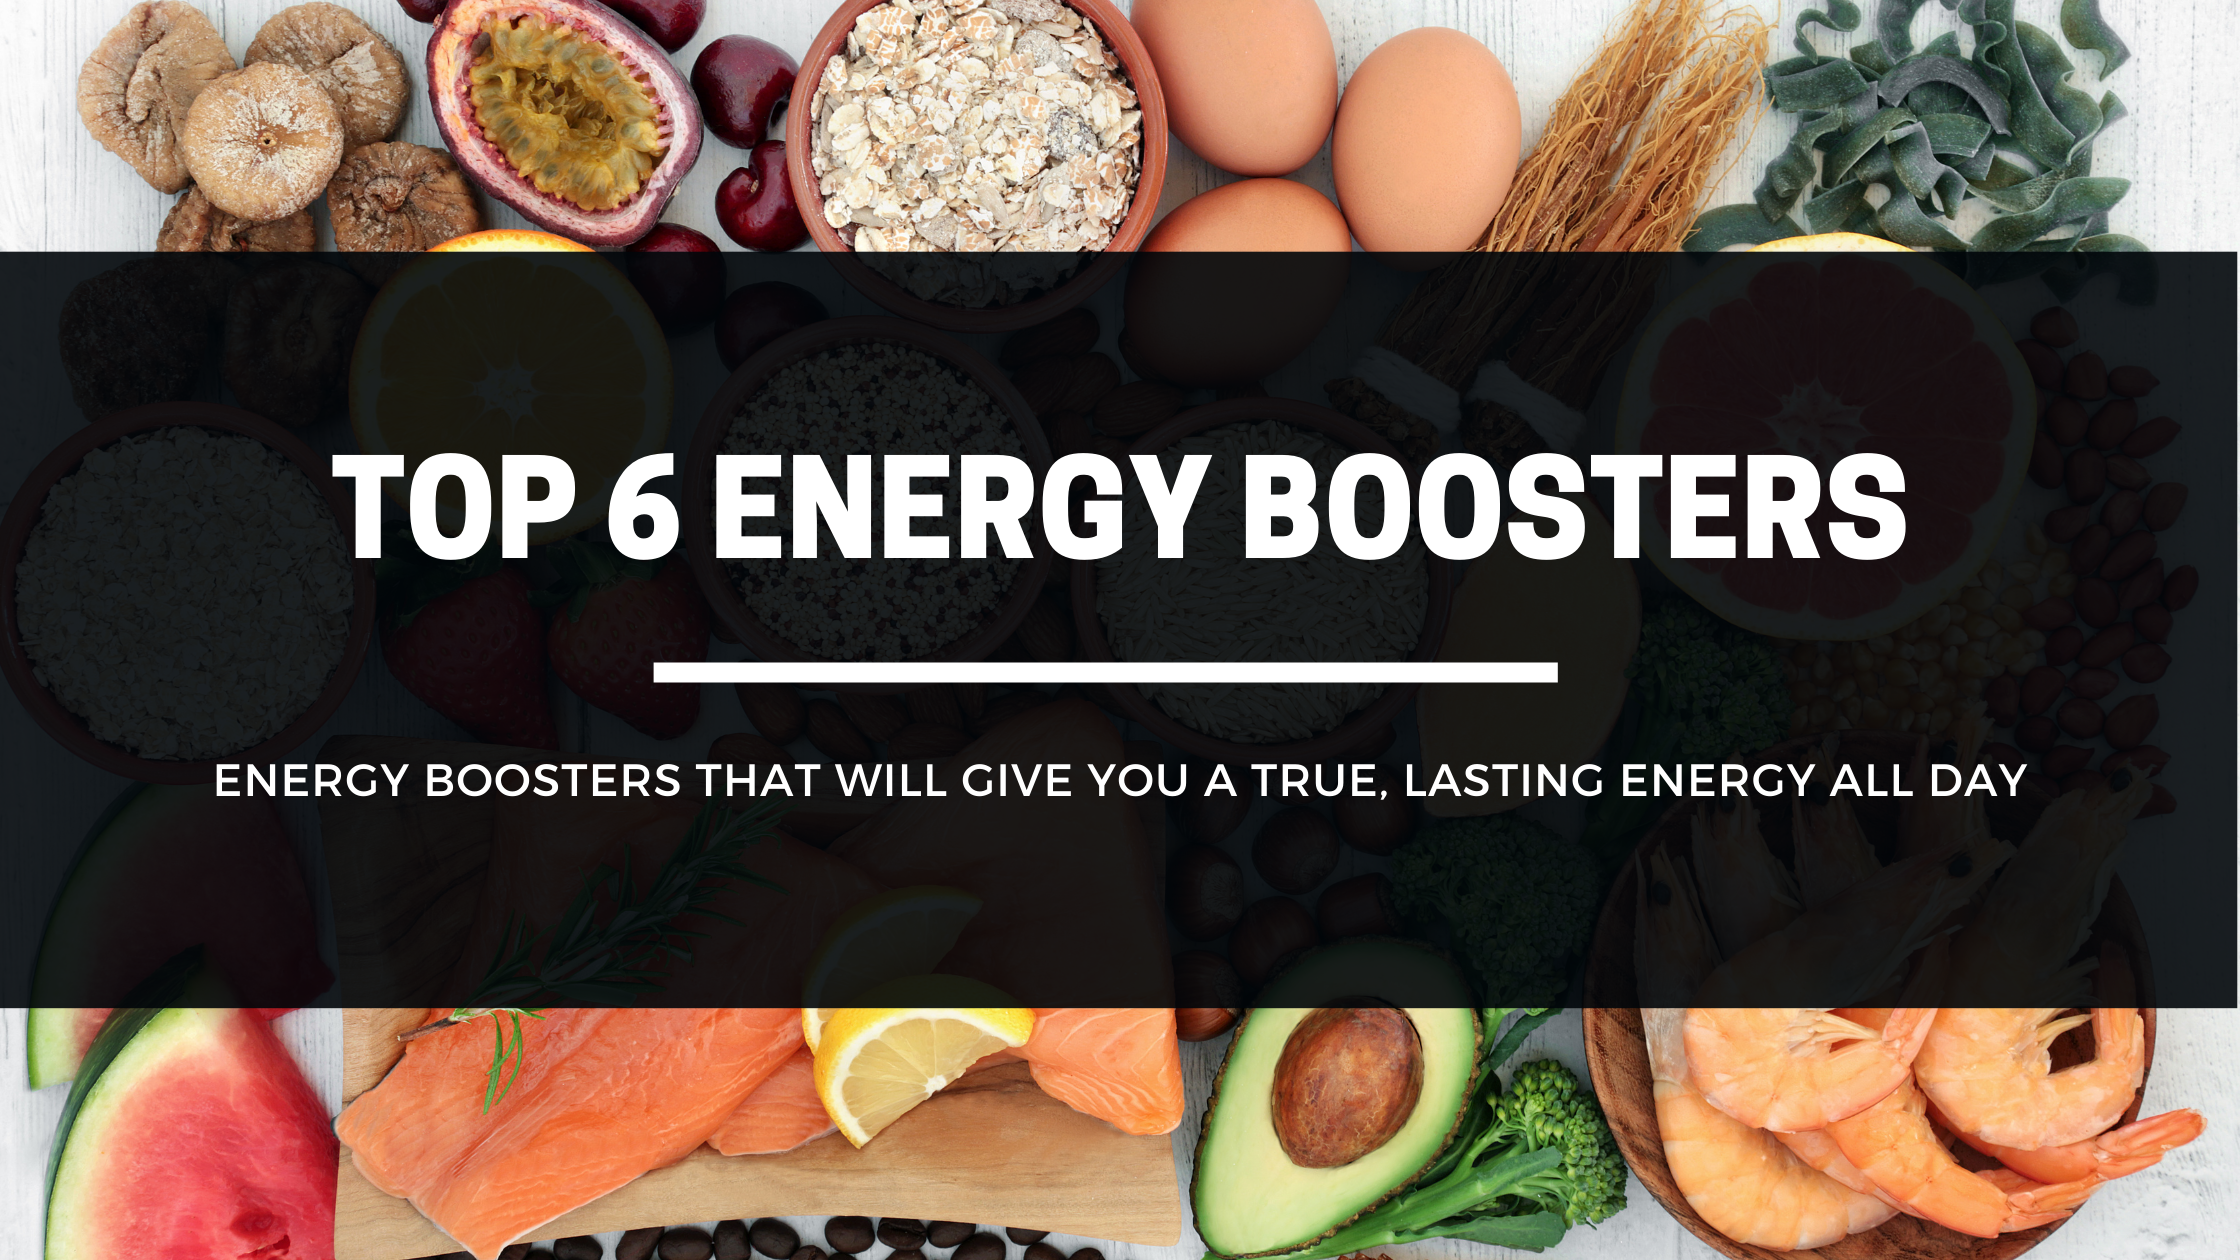 Top 6 Energy Boosters